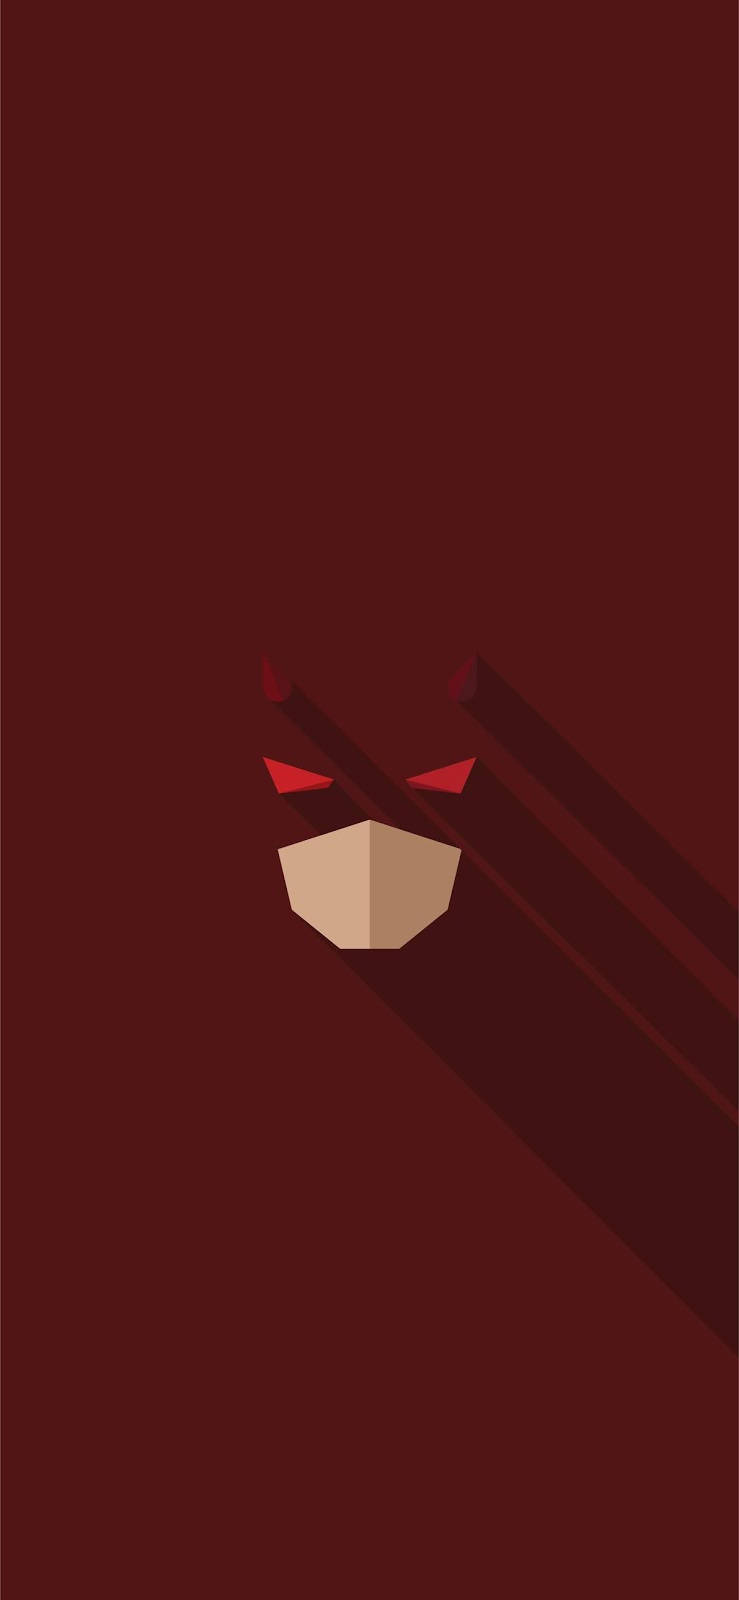 Simple Maroon Daredevil Abstract Background